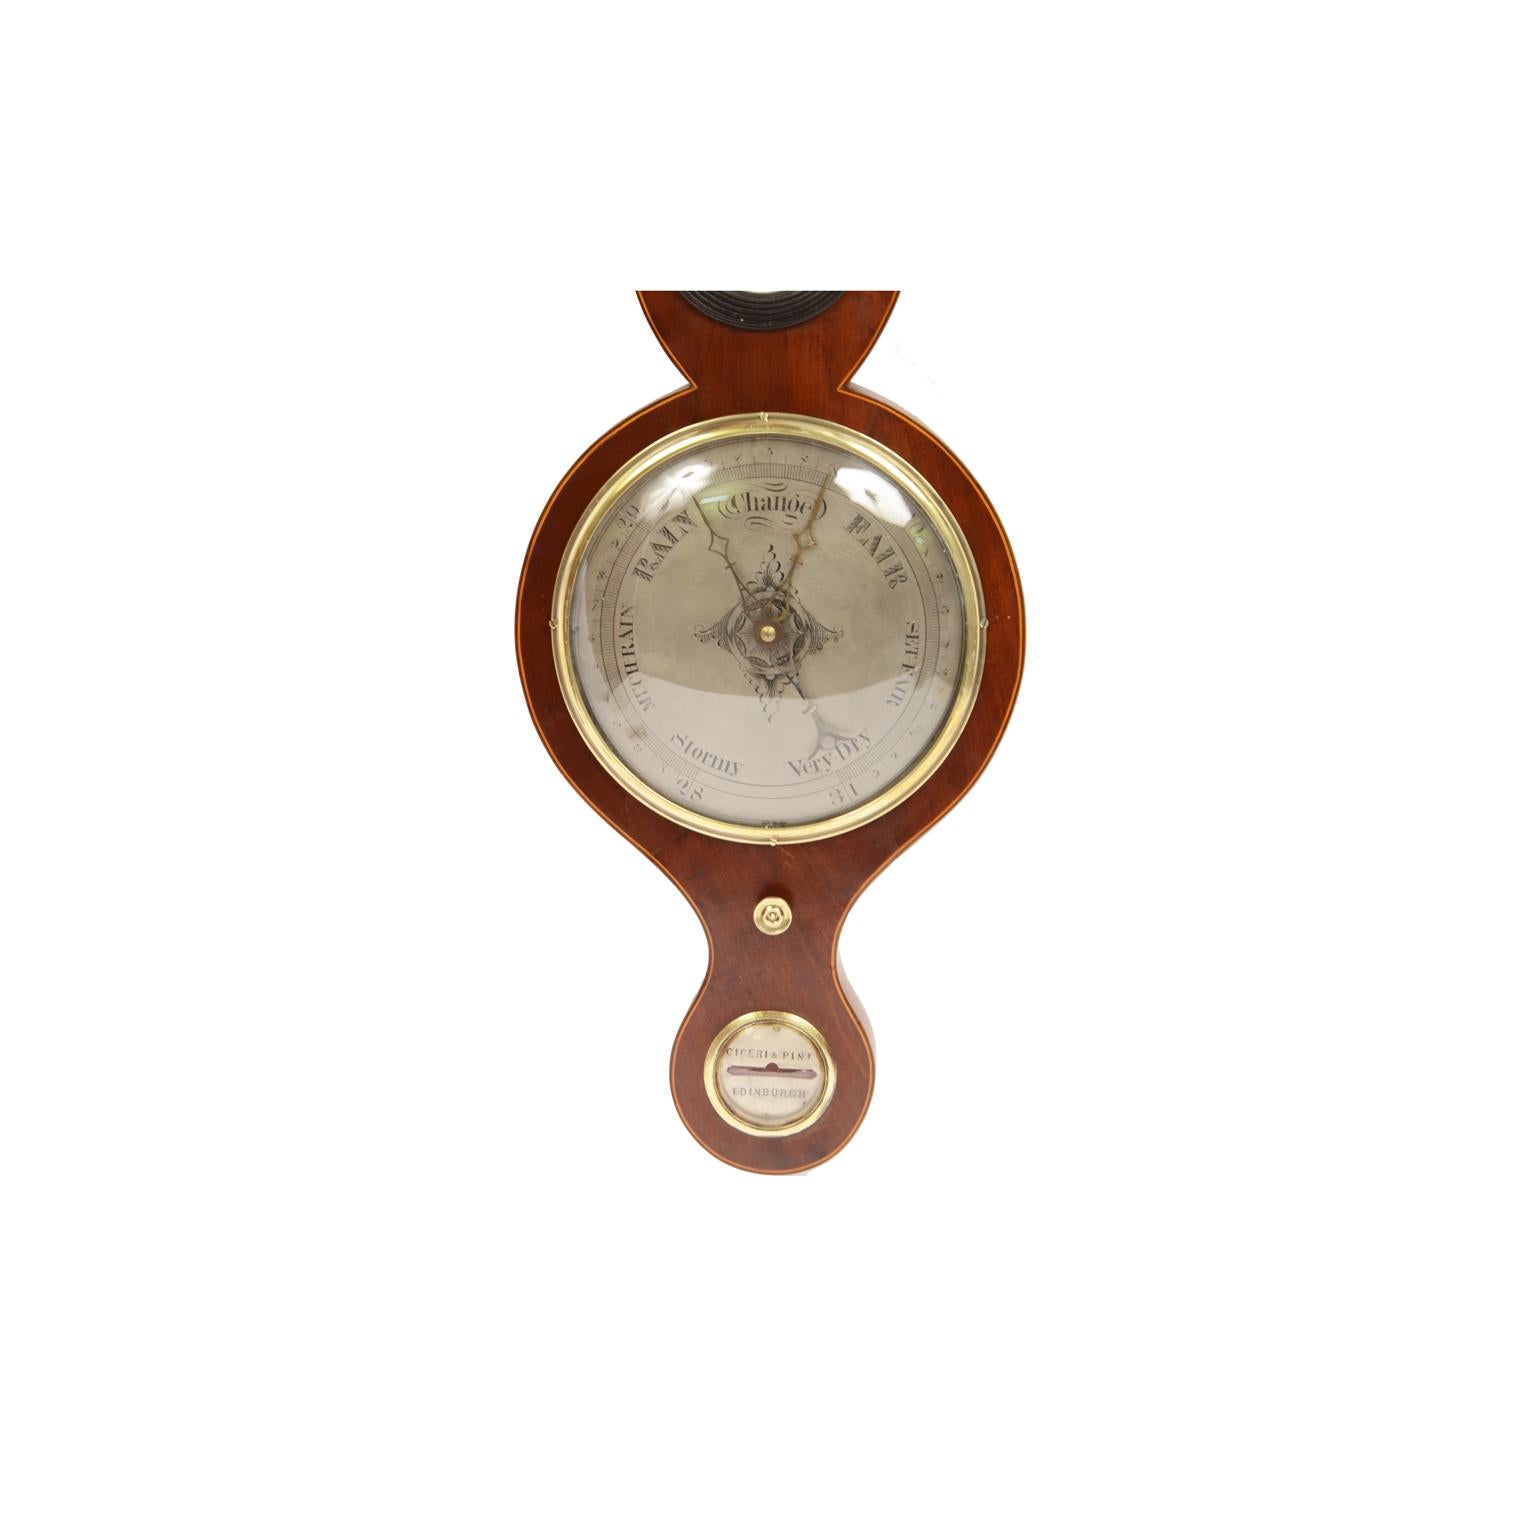 Barometer of mahogany wood with cedar wood edges, signed Ciceri and Pini active between 1842 and 1858. Silver-plated brass dial engraved with meteorological indications. The reading of the barometer is indicated by a double hand, the first one